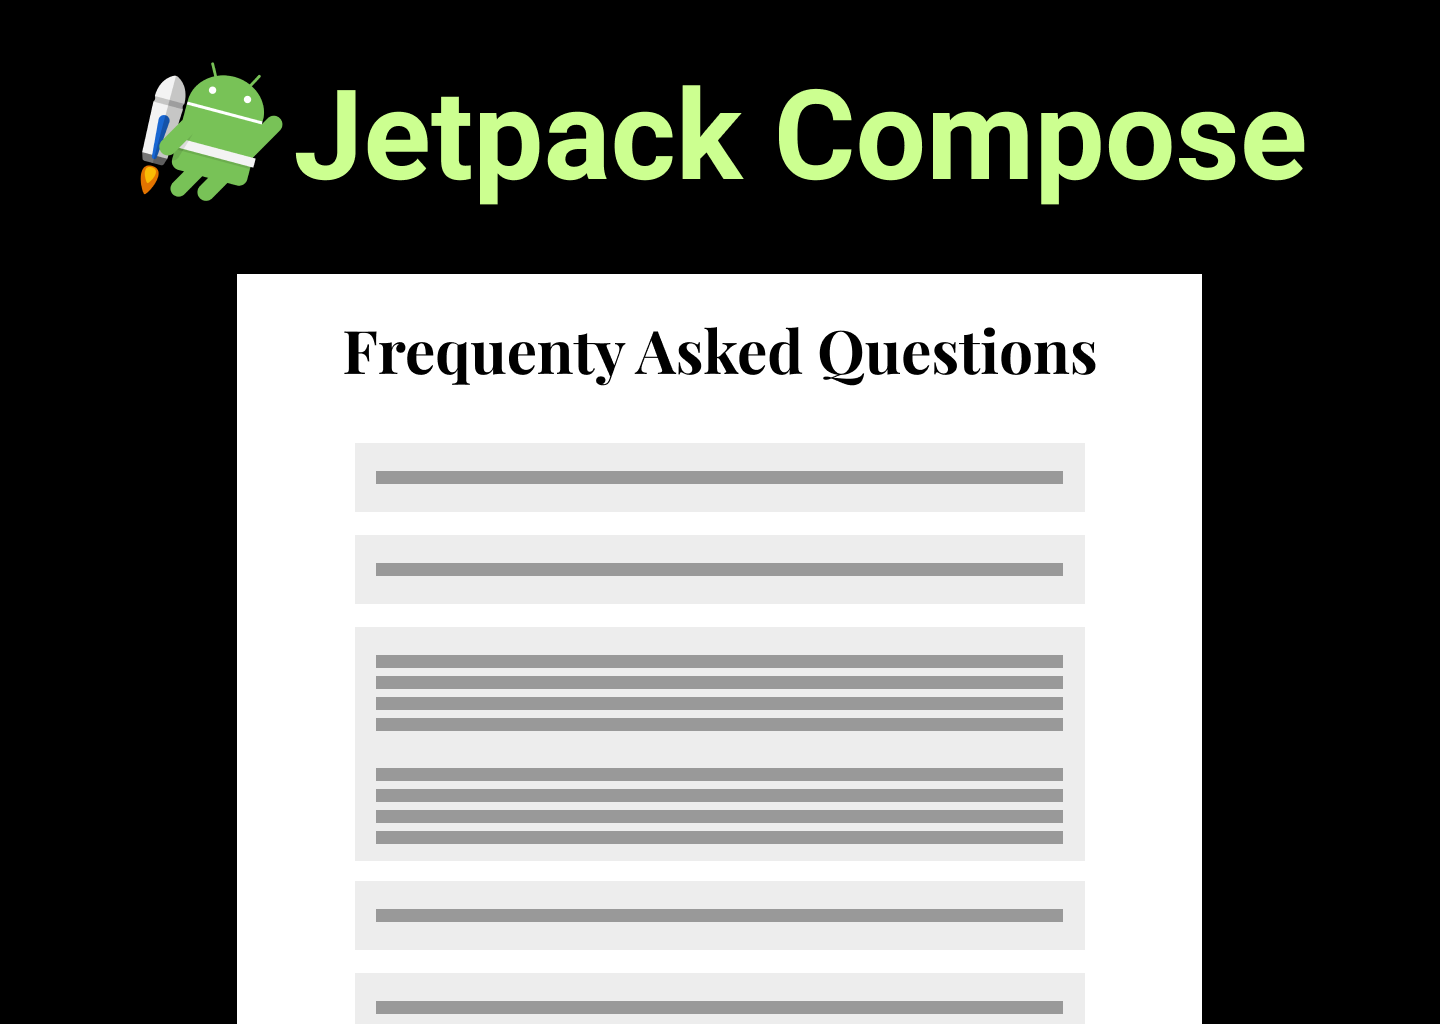 What is the meaning of jetpacks was yes? - Question about English (US)